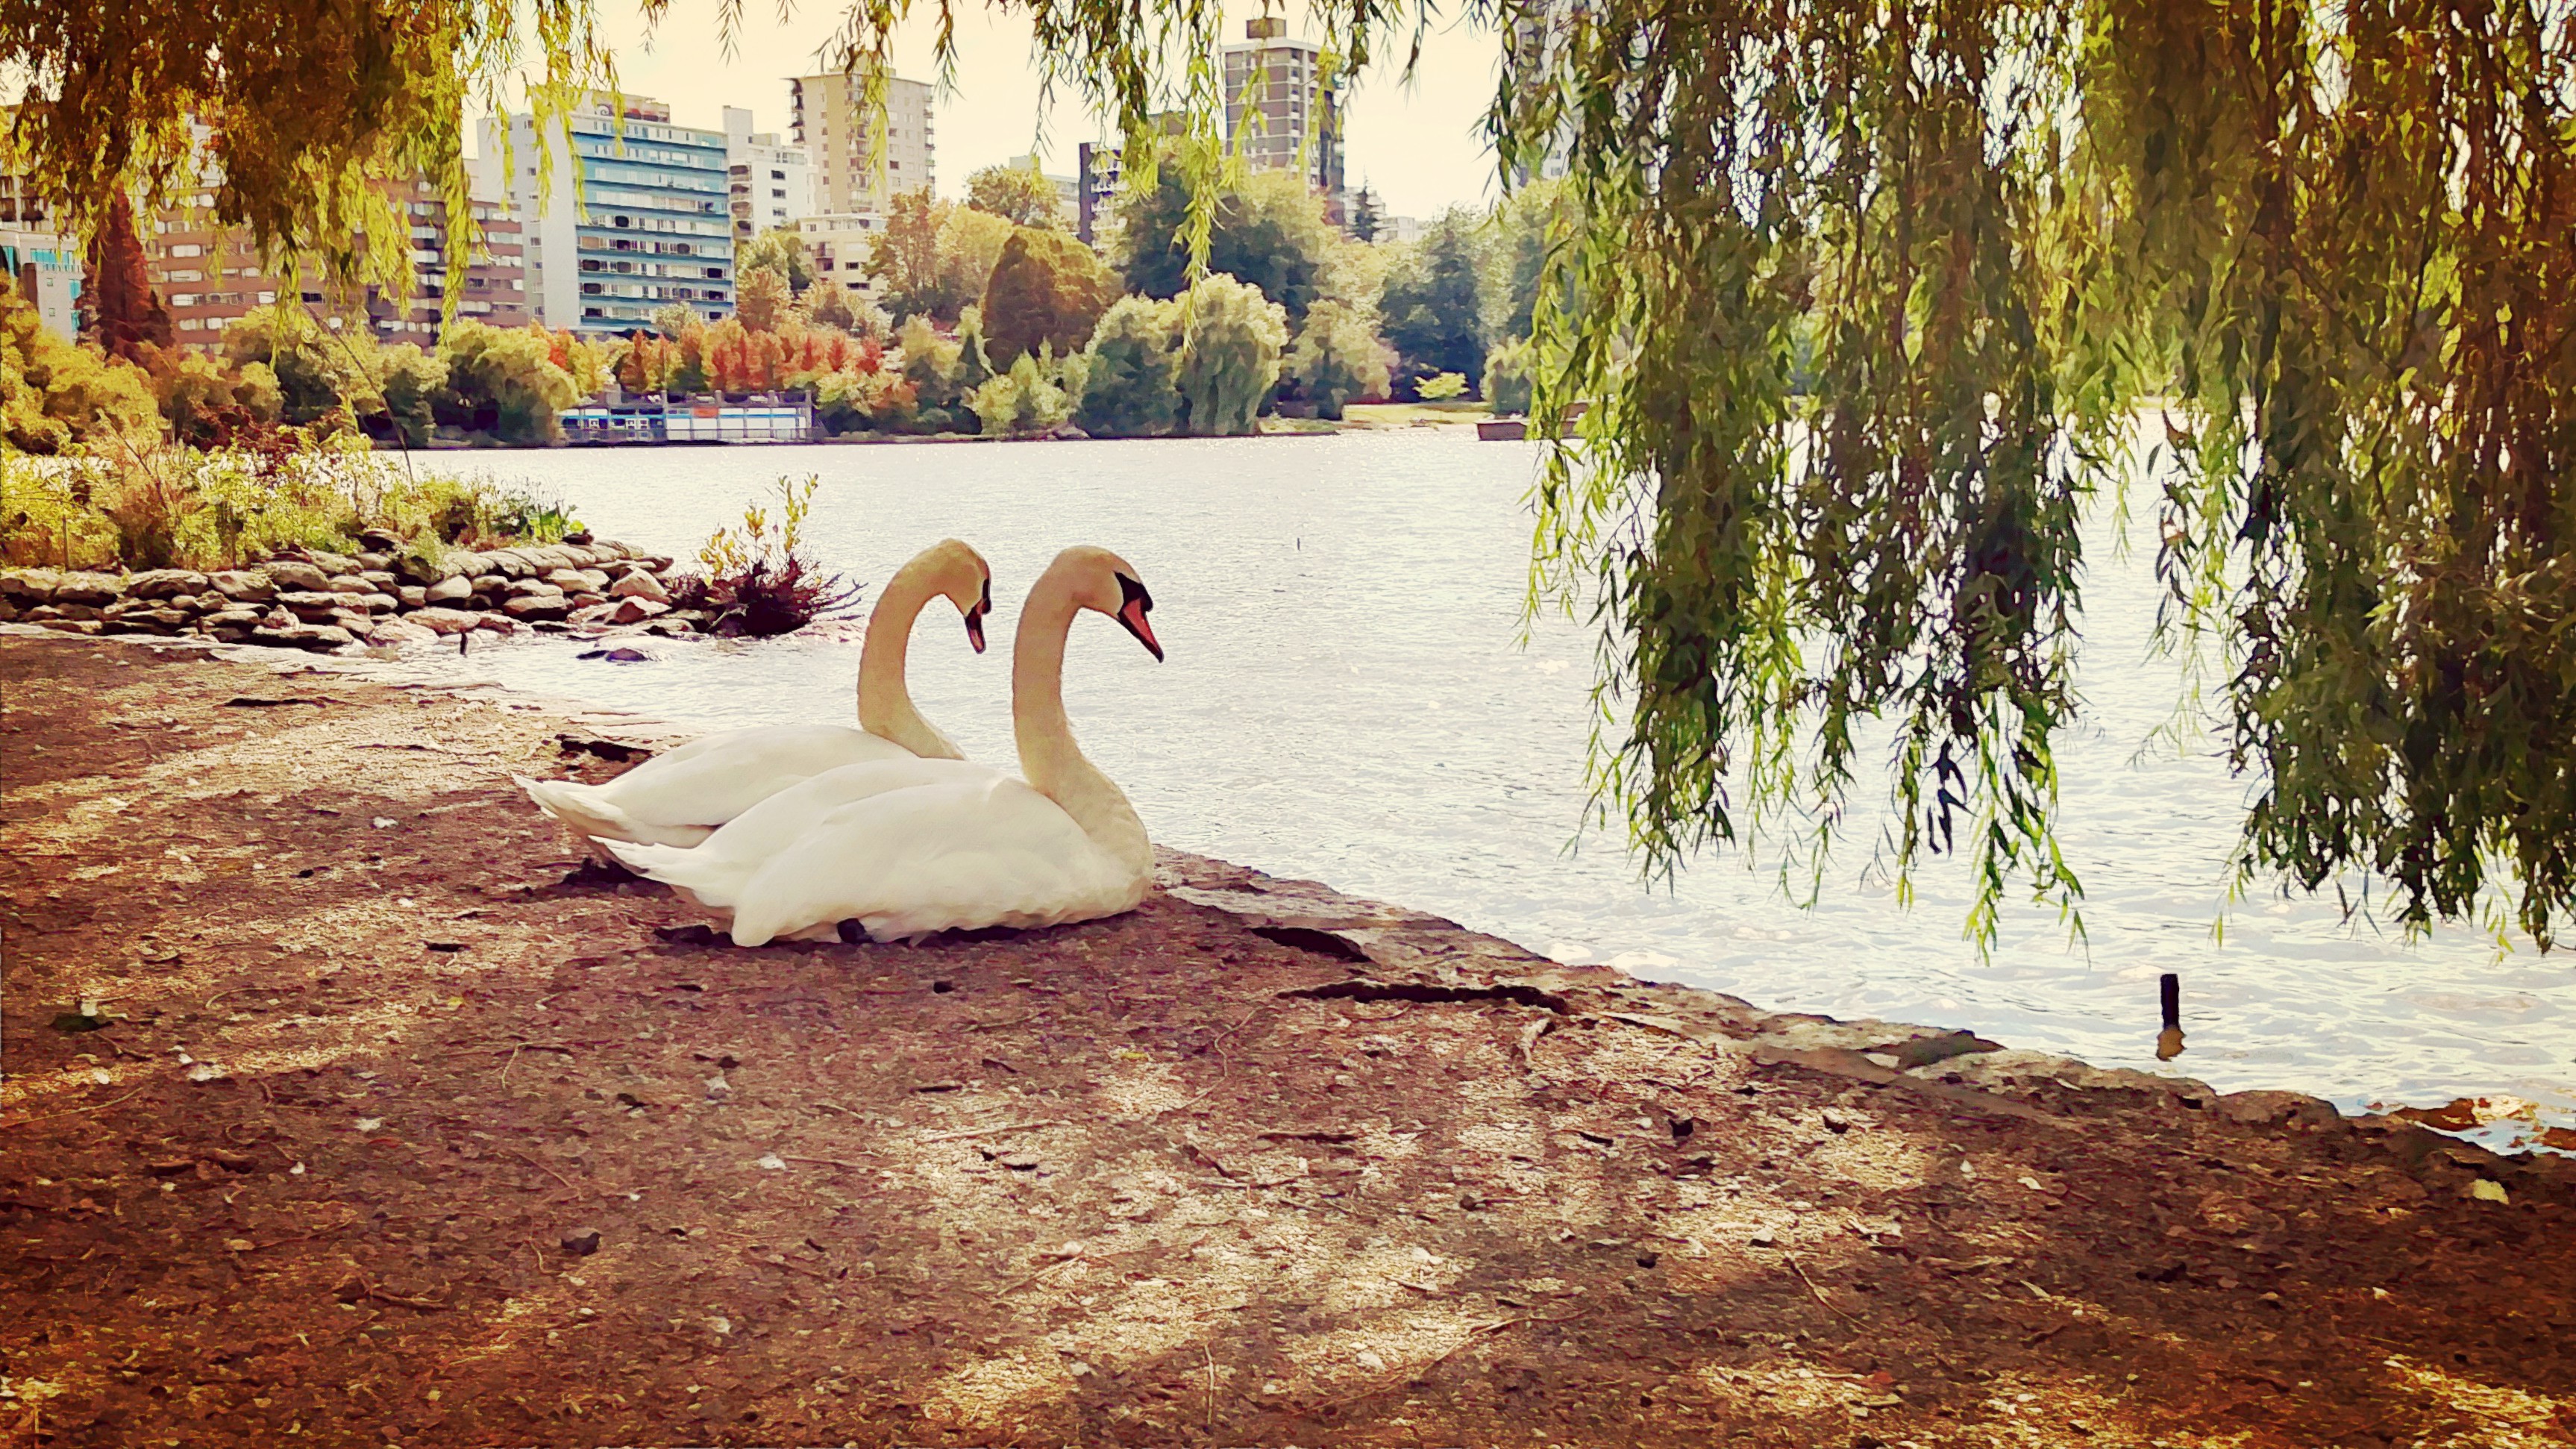 Two swans in a park next to water.